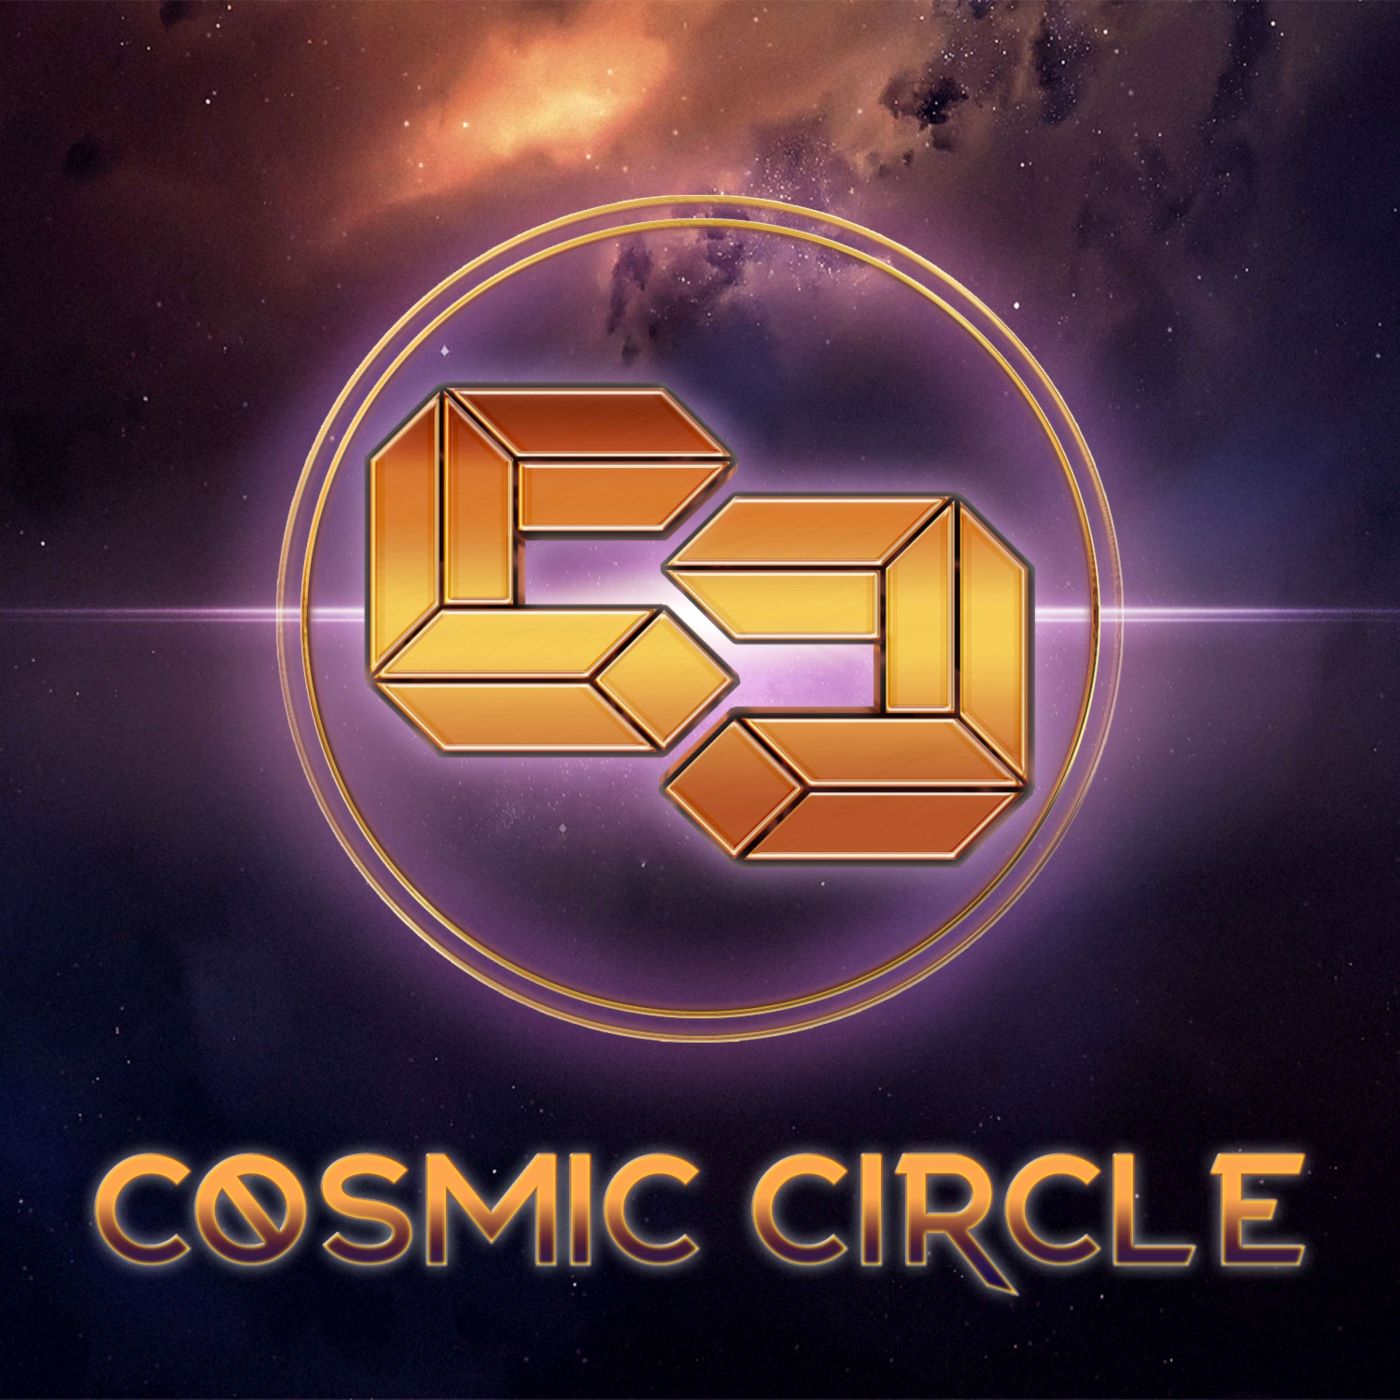 Cosmic Circle Ep. 31: 'The Flash' Movie Discussion (Spoilers!)